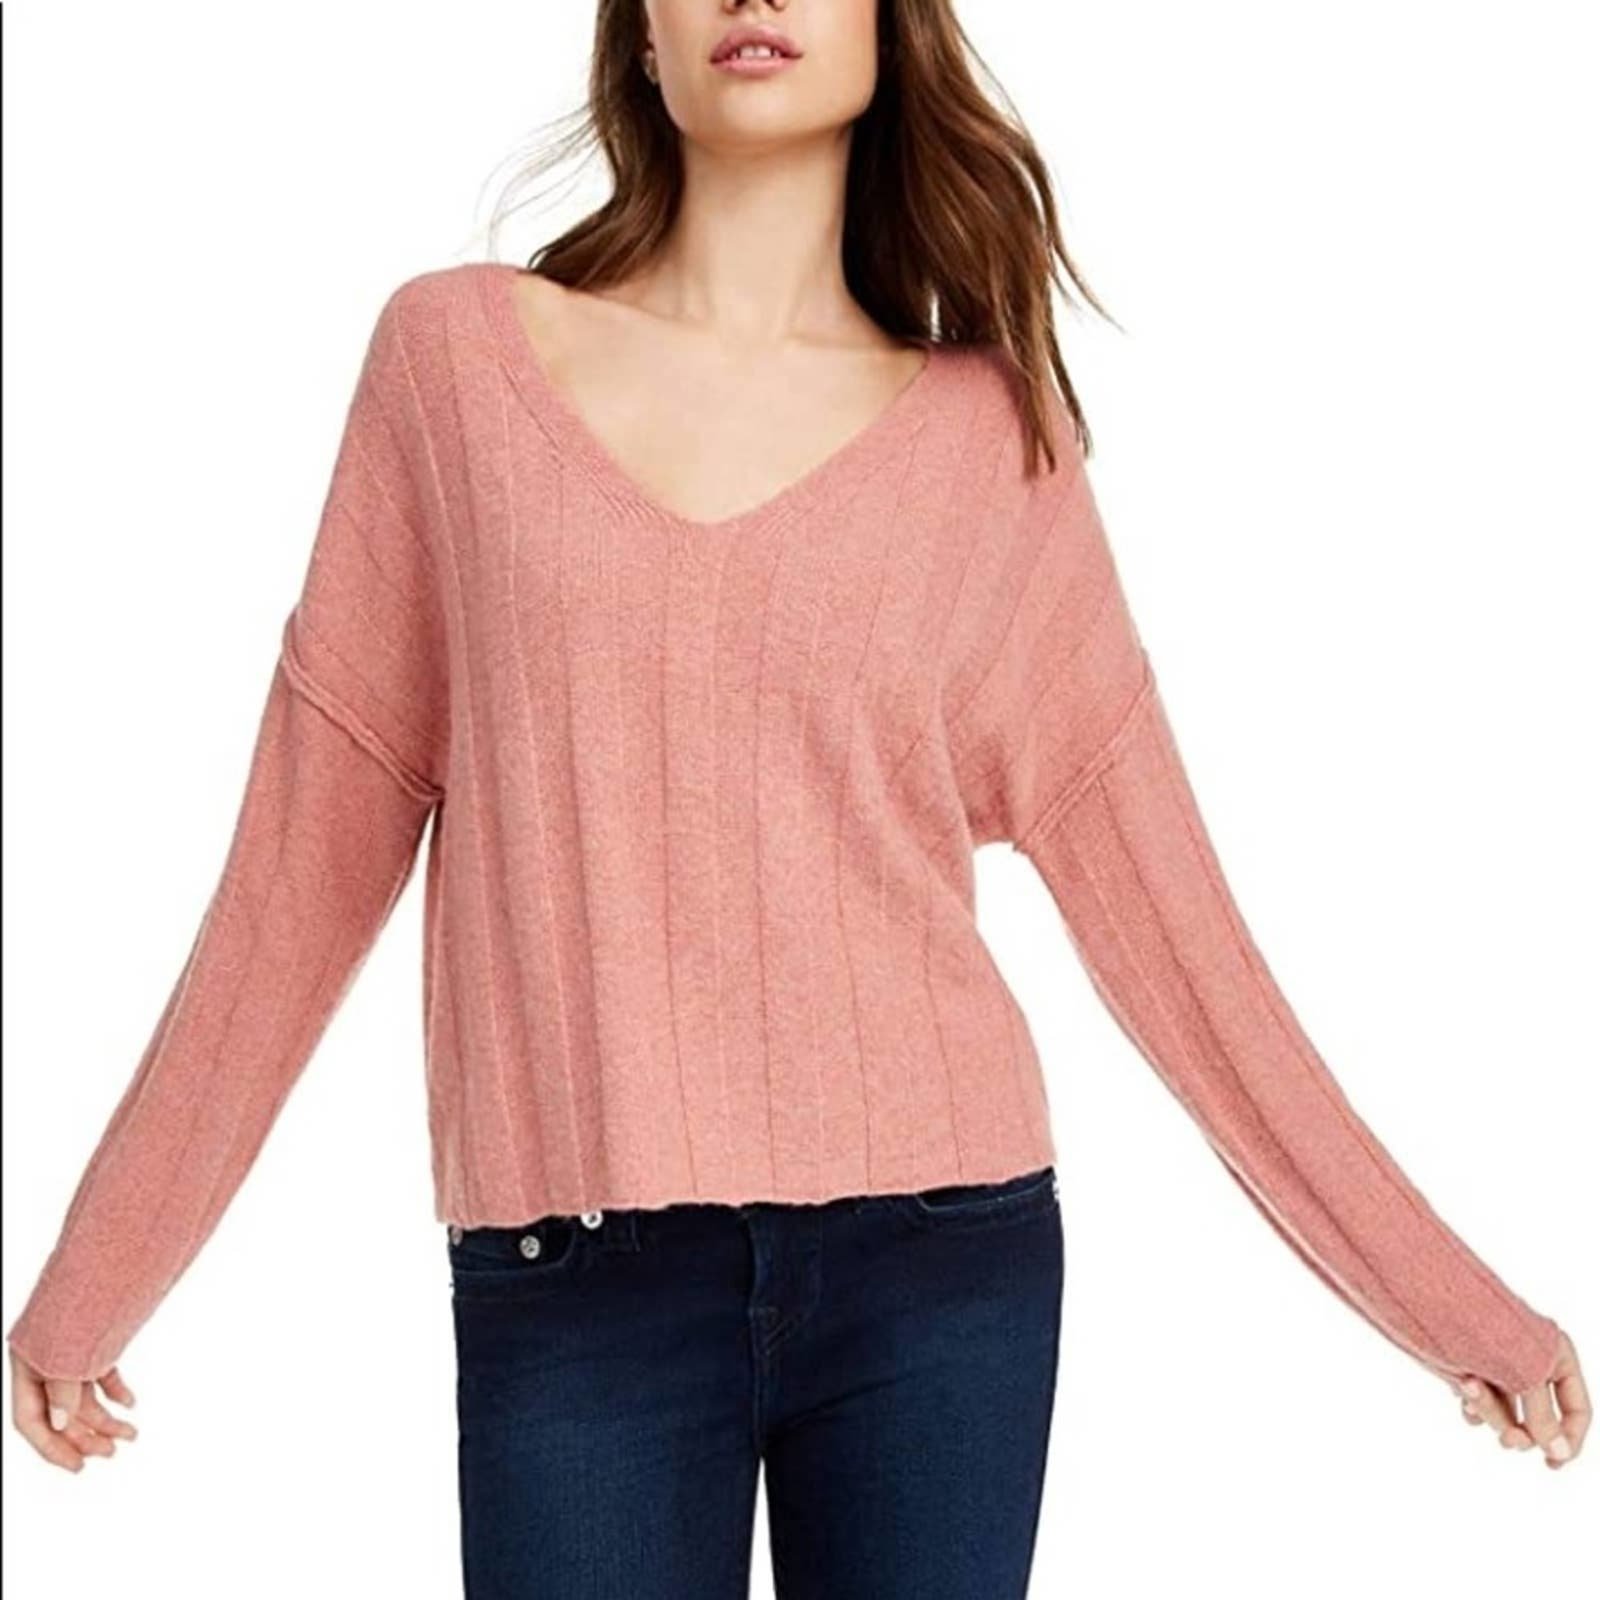 large selection Pink Rose Ribbed Raw-Hem Sweater iYXFVeALm Everyday Low Prices